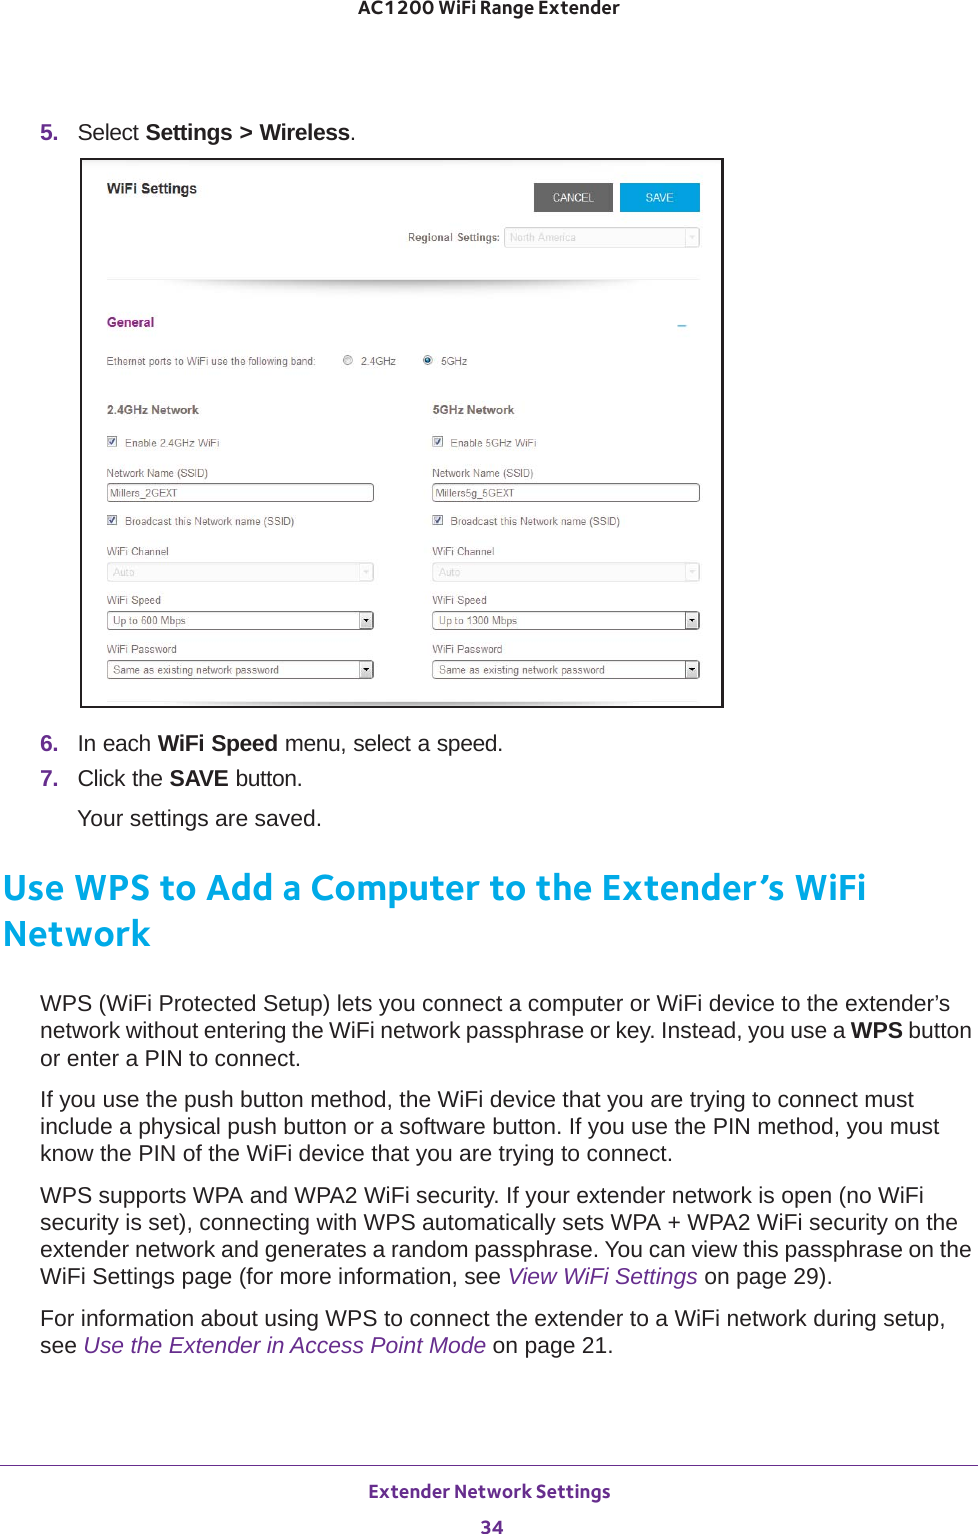 Extender Network Settings 34AC1200 WiFi Range Extender 5.  Select Settings &gt; Wireless.6.  In each WiFi Speed menu, select a speed.7.  Click the SAVE button.Your settings are saved.Use WPS to Add a Computer to the Extender’s WiFi NetworkWPS (WiFi Protected Setup) lets you connect a computer or WiFi device to the extender’s network without entering the WiFi network passphrase or key. Instead, you use a WPS button or enter a PIN to connect.If you use the push button method, the WiFi device that you are trying to connect must include a physical push button or a software button. If you use the PIN method, you must know the PIN of the WiFi device that you are trying to connect.WPS supports WPA and WPA2 WiFi security. If your extender network is open (no WiFi security is set), connecting with WPS automatically sets WPA + WPA2 WiFi security on the extender network and generates a random passphrase. You can view this passphrase on the WiFi Settings page (for more information, see View WiFi Settings on page  29).For information about using WPS to connect the extender to a WiFi network during setup, see Use the Extender in Access Point Mode on page  21.